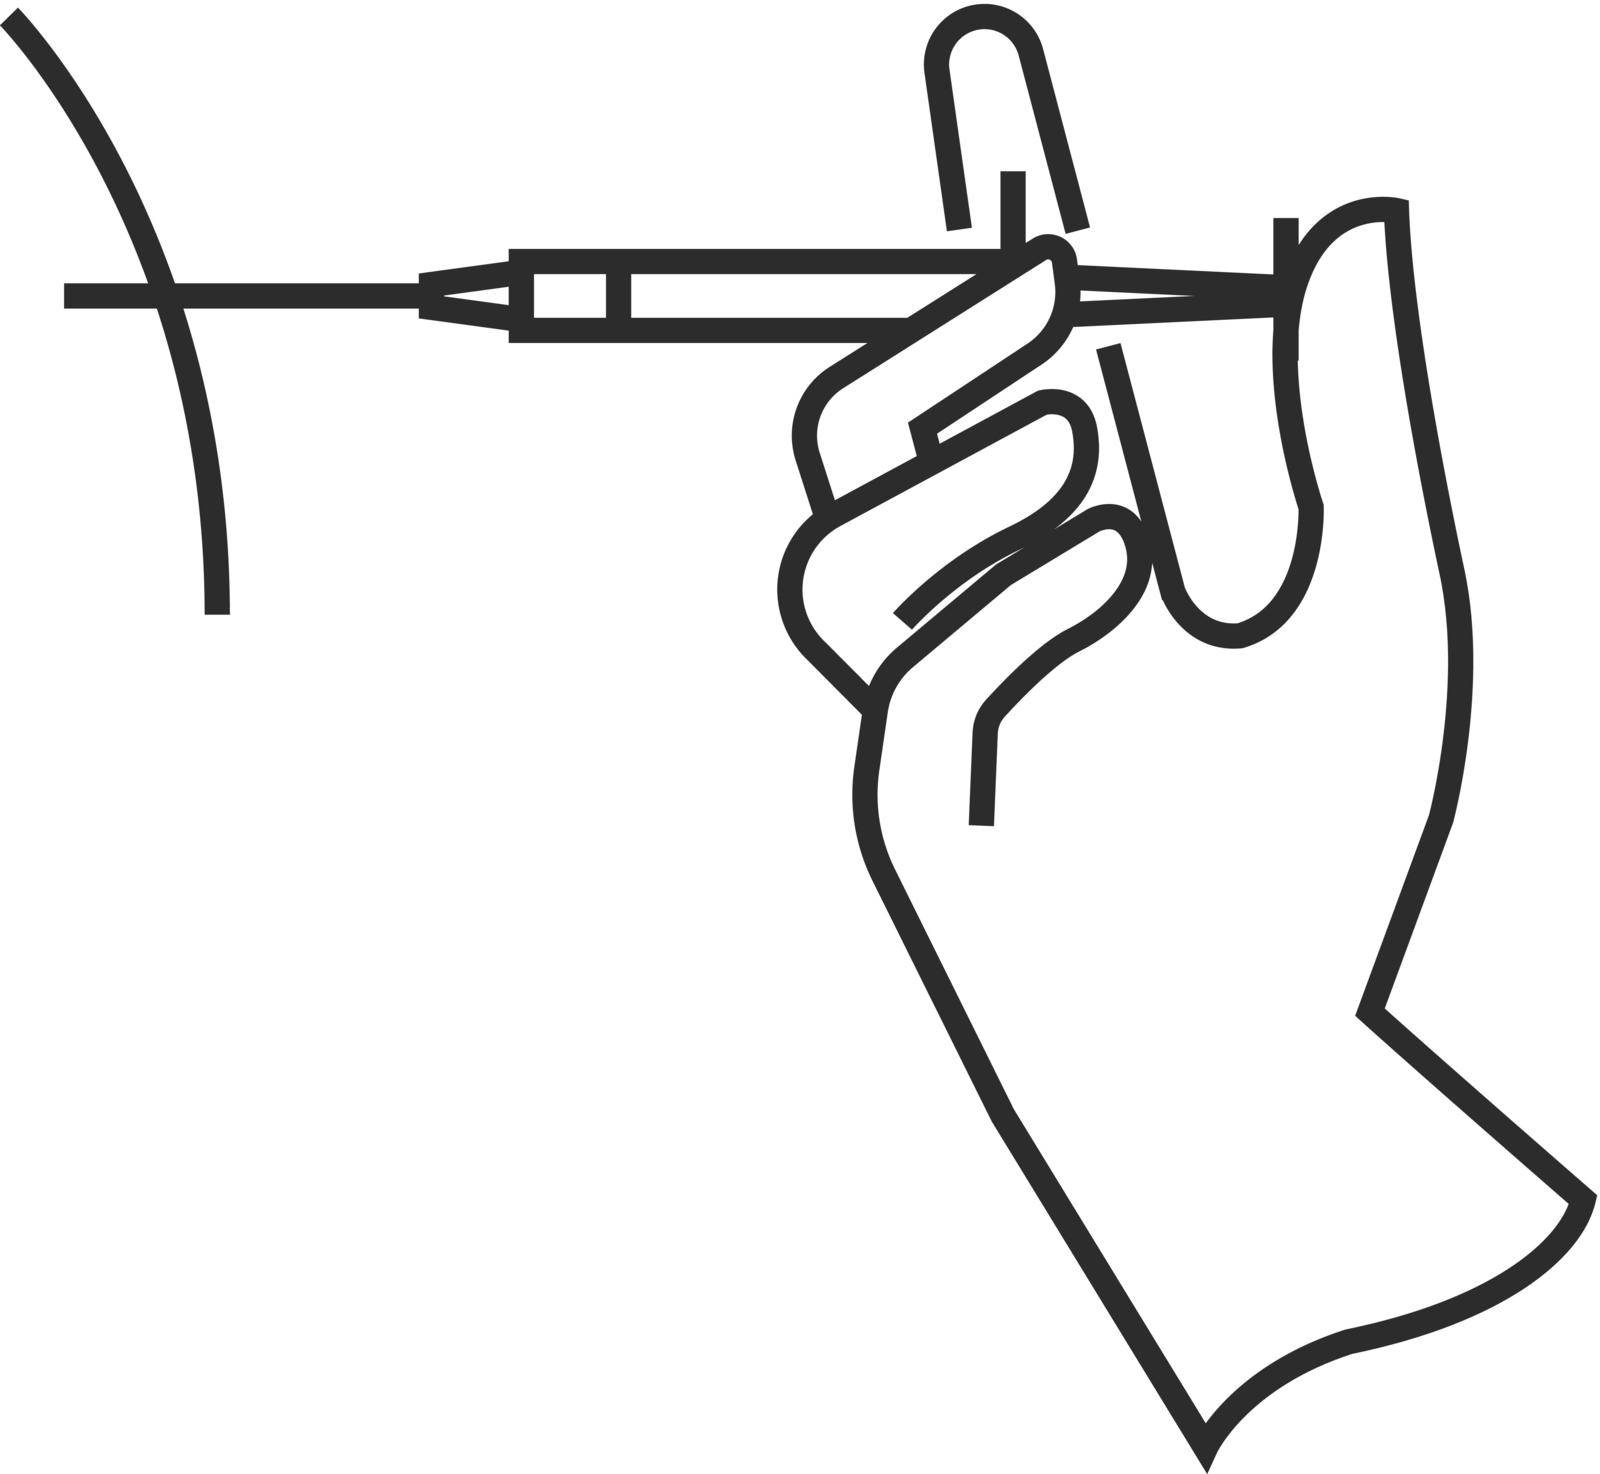 Vaccination icon in thin outline. Vaccine injection using syringe.